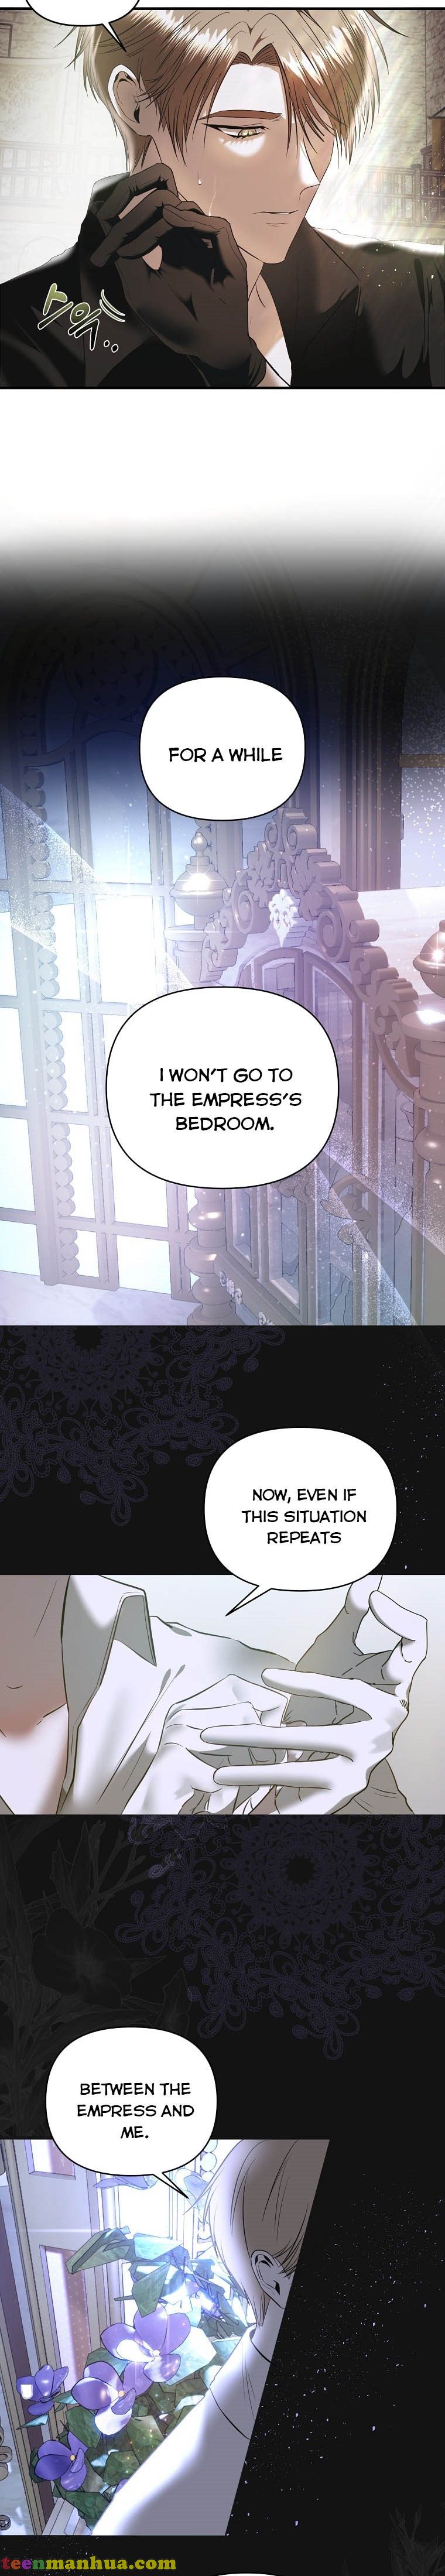 How To Survive Sleeping With The Emperor - Page 2